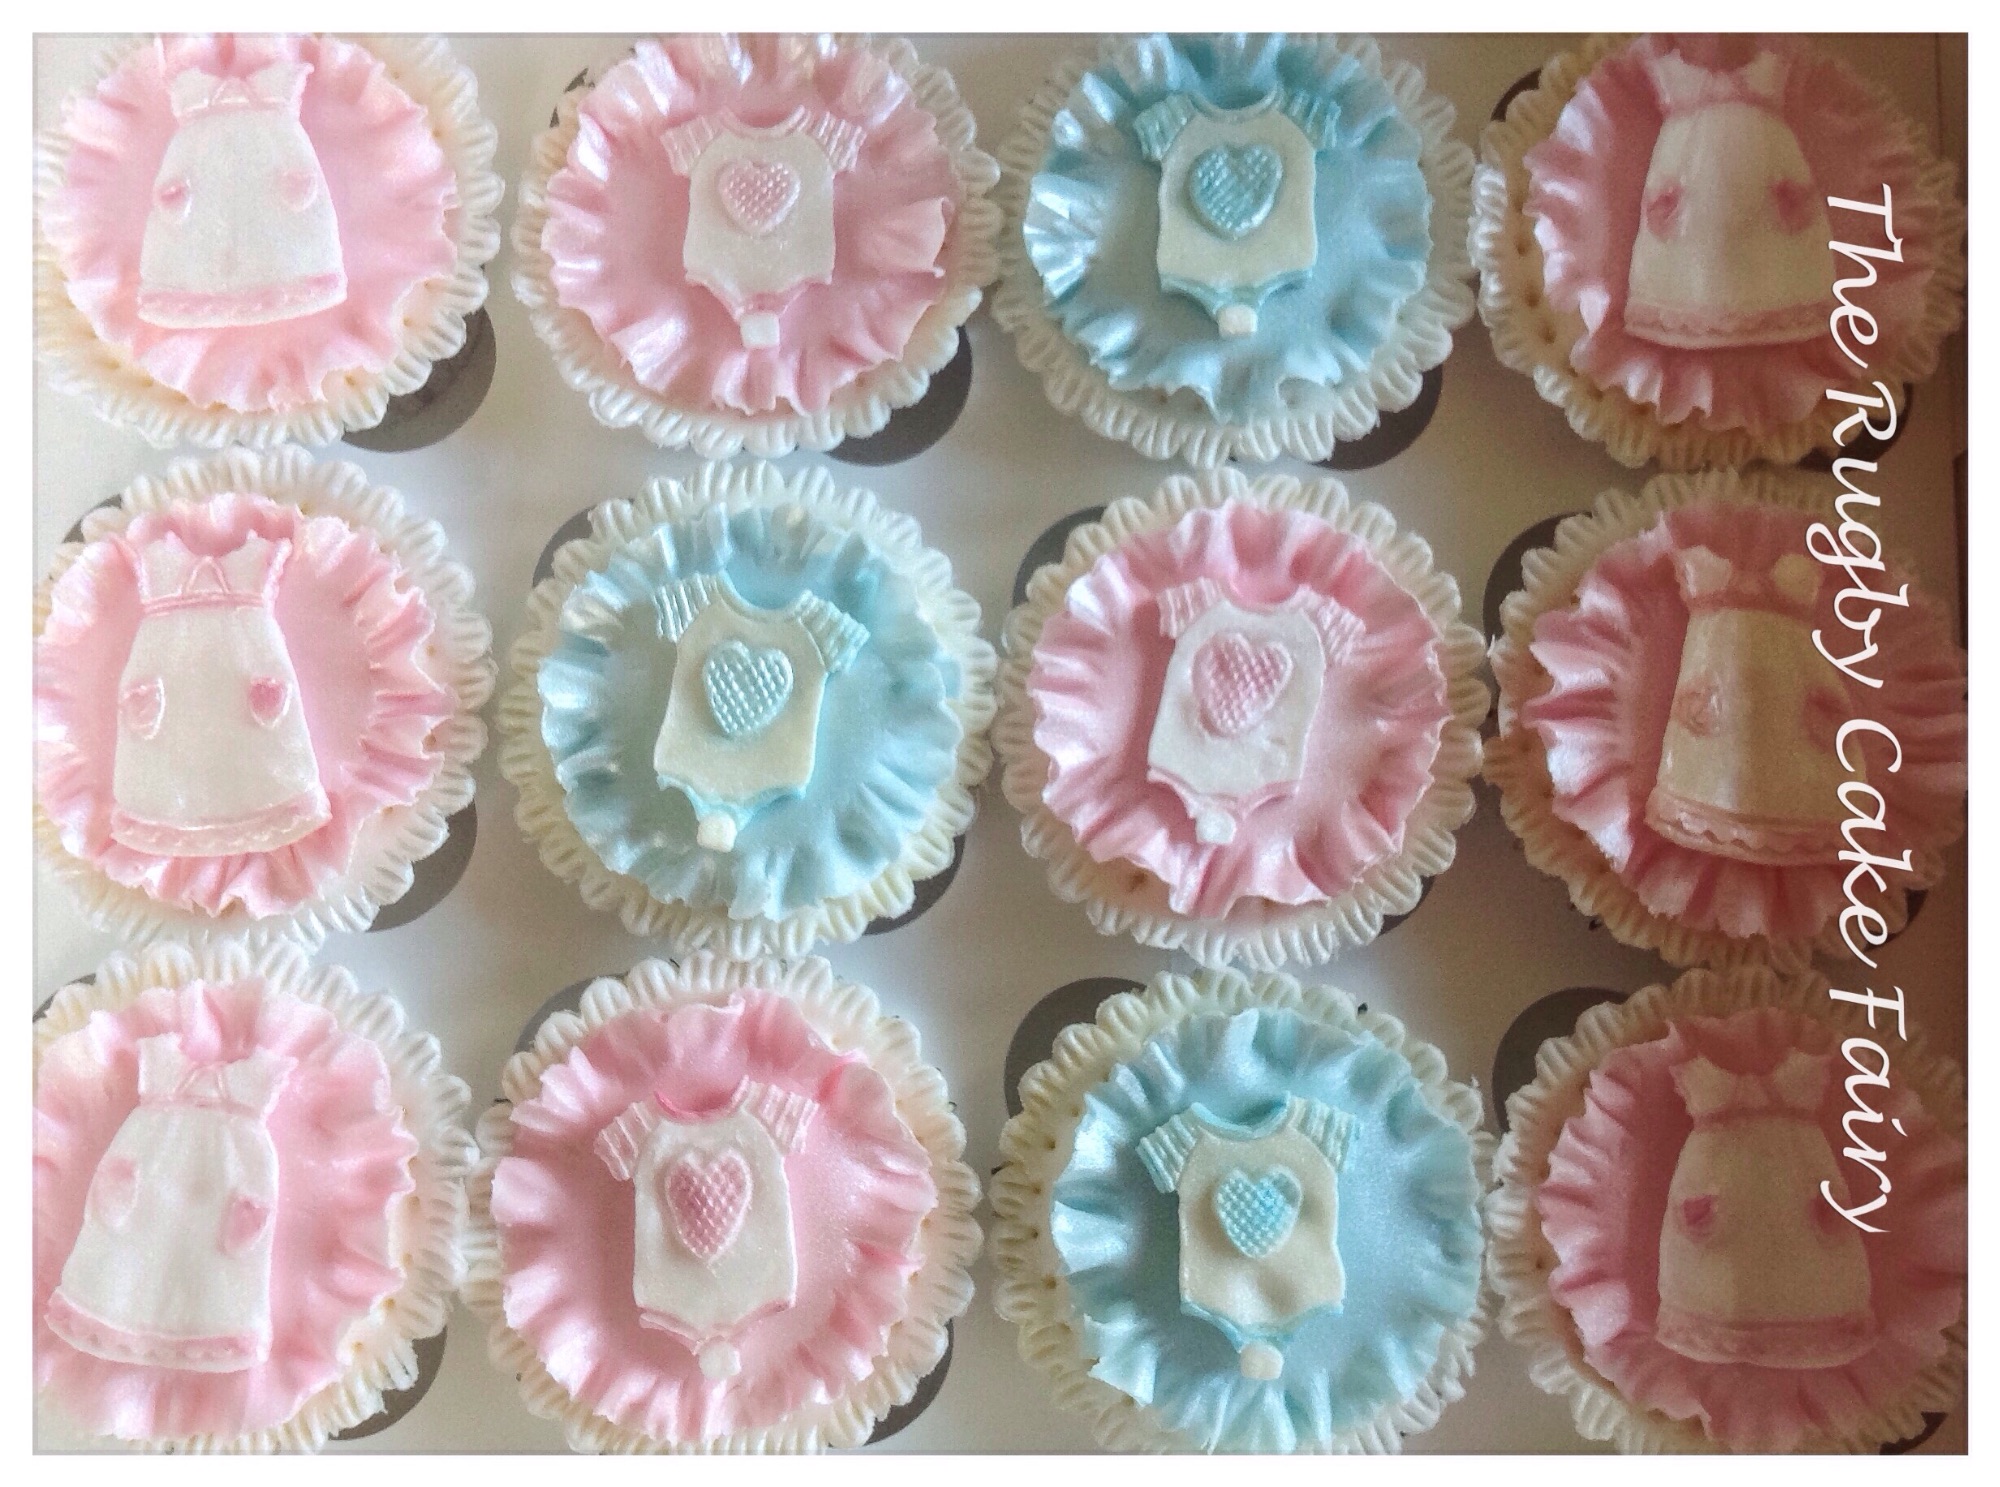 Baby clothes cupcakes